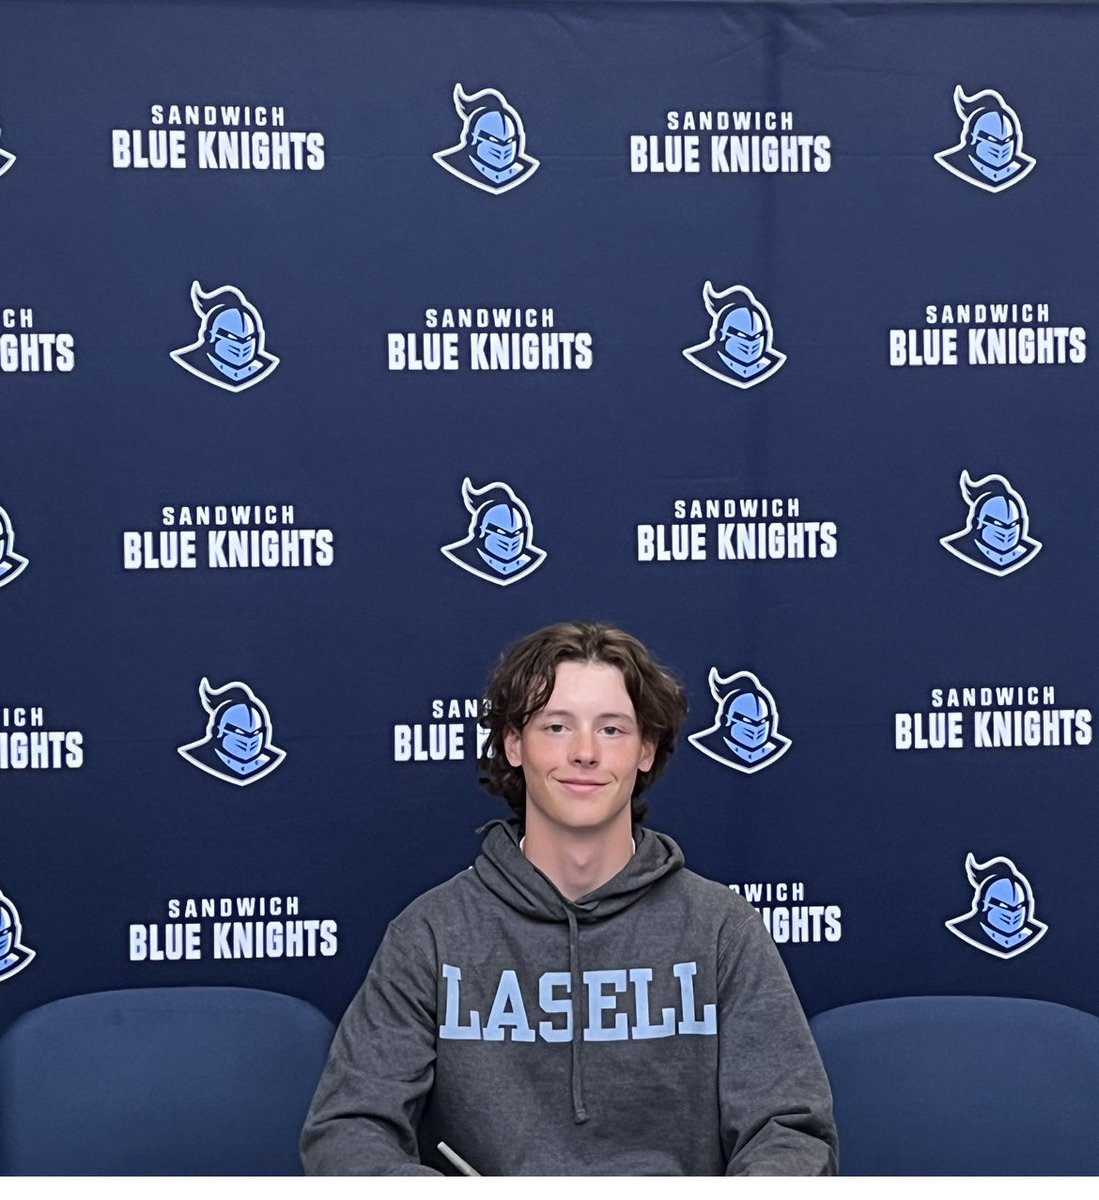 Congratulations to Casey Woodil on continuing his athletic career playing baseball at Lasell University #BKP